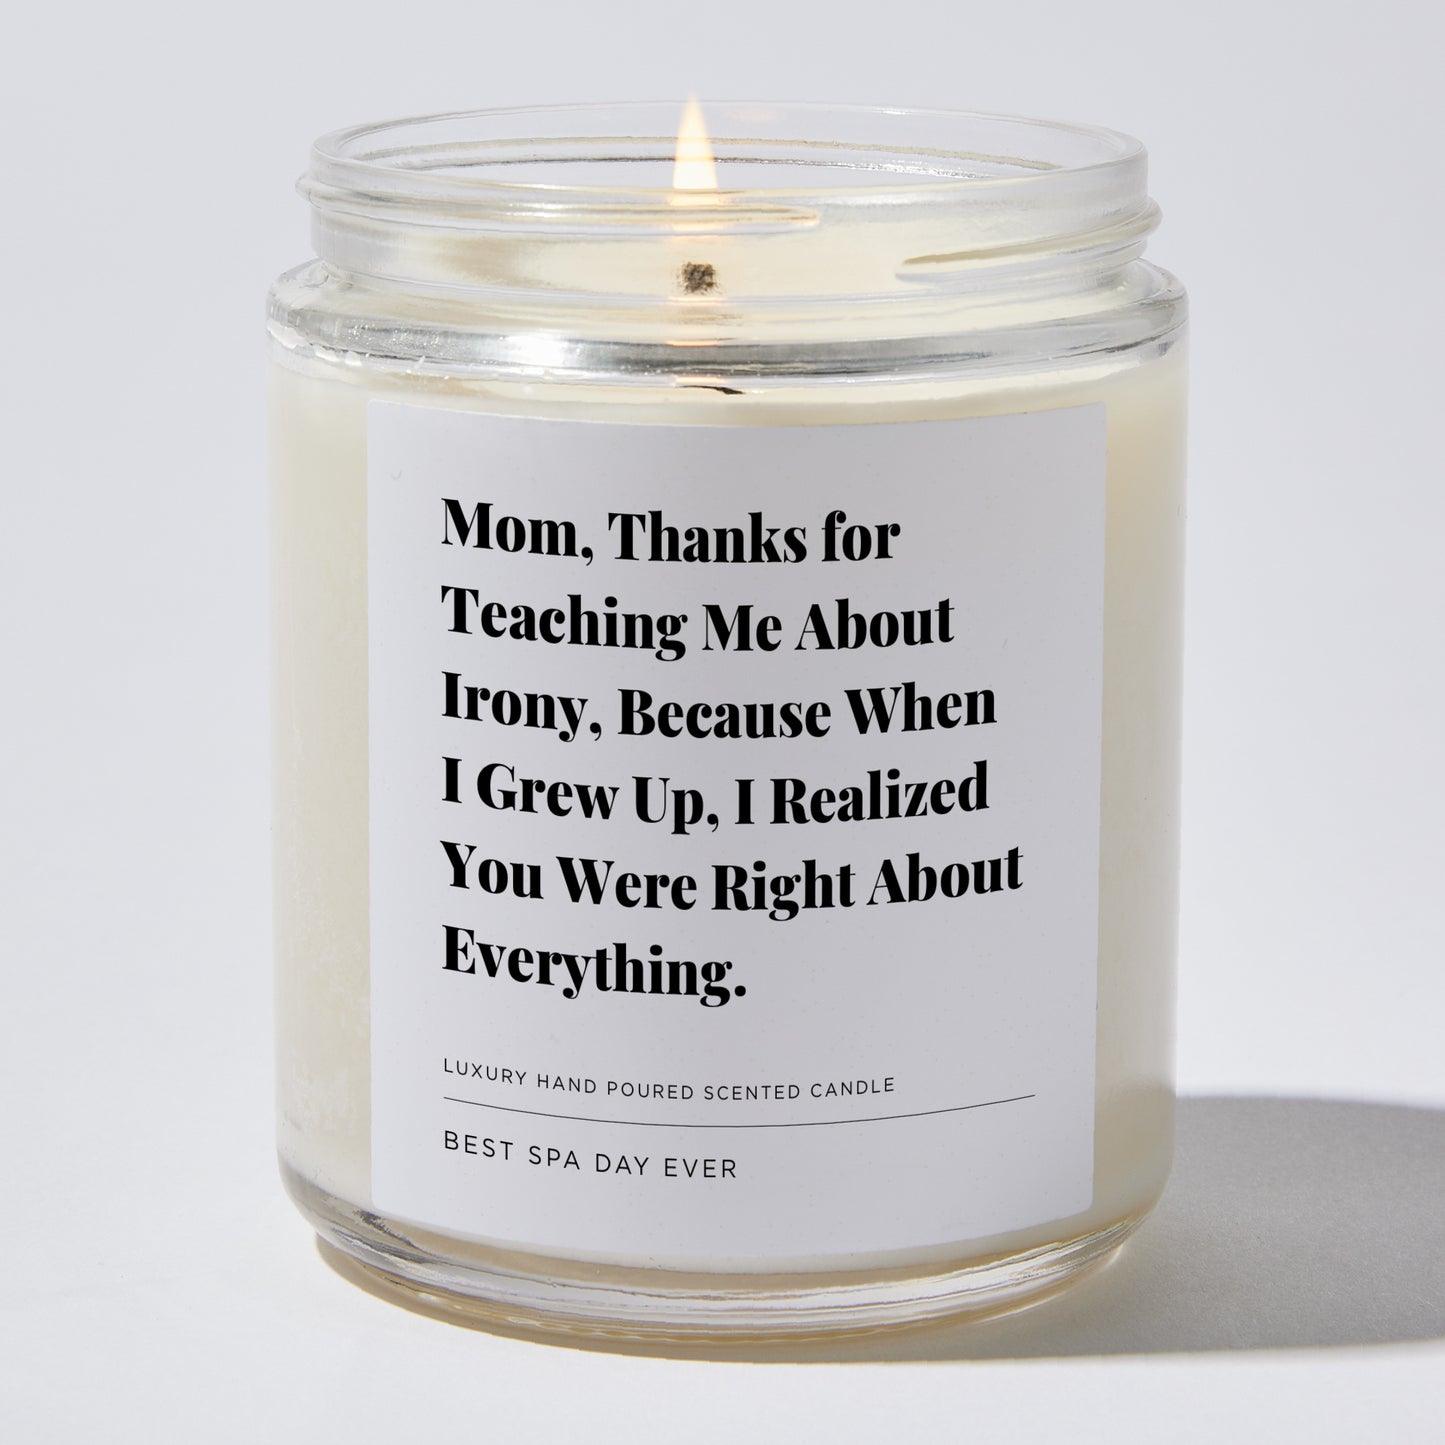 Gift for Mom - Mom, thanks for teaching me about irony, because when I grew up, I realized you were right about everything. - Candle